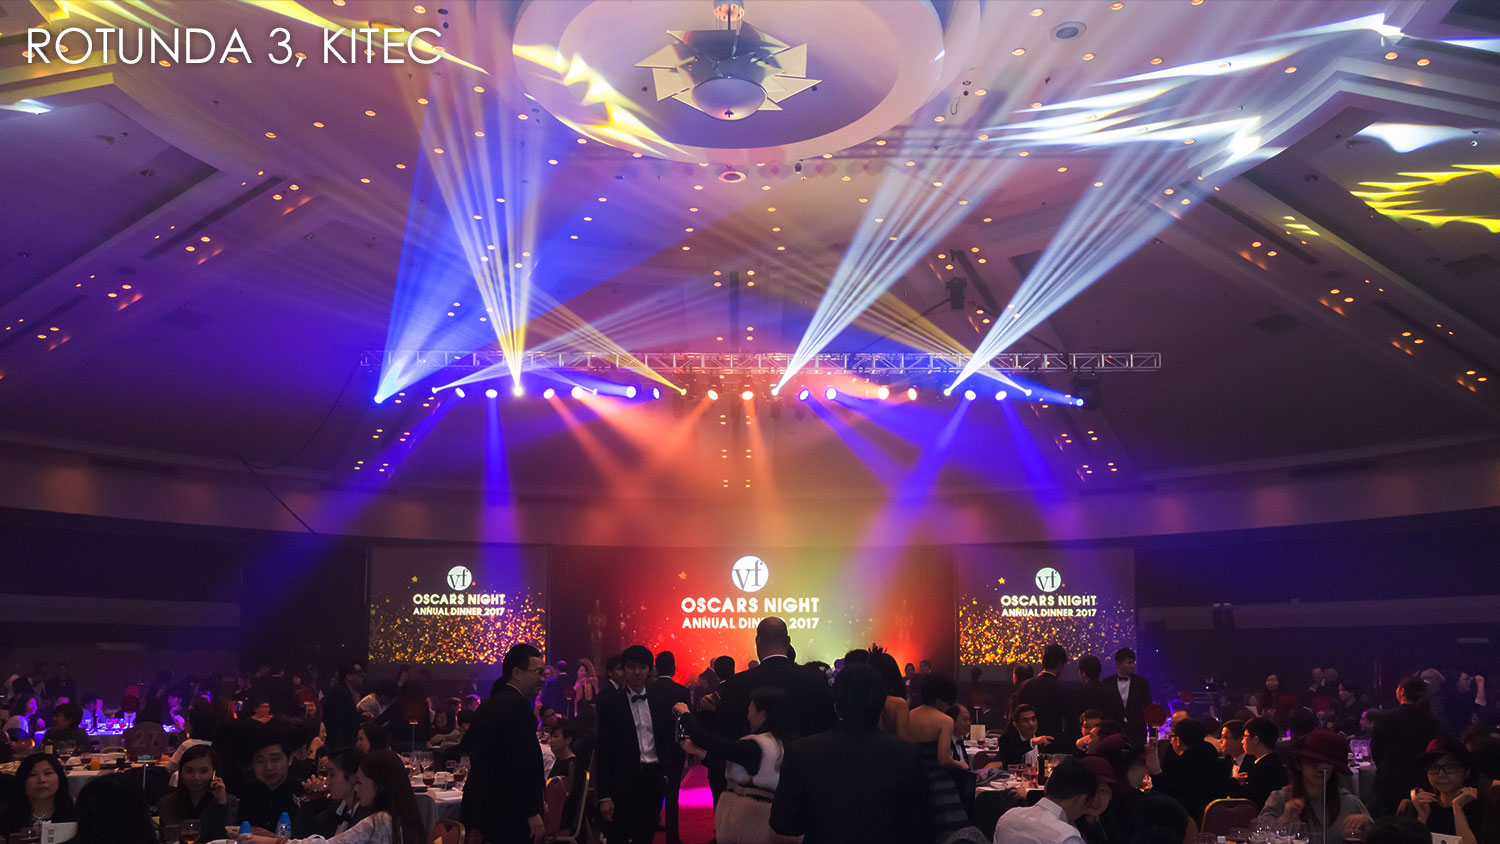 We are an LED lighting rental company providing event lighting rental services in Hong Kong. Our lighting equipment greatly enhances the atmosphere at any function and is used for all types of events including gala dinners, conferences, wedding banquets, private parties, product launches, and outdoor festivals.